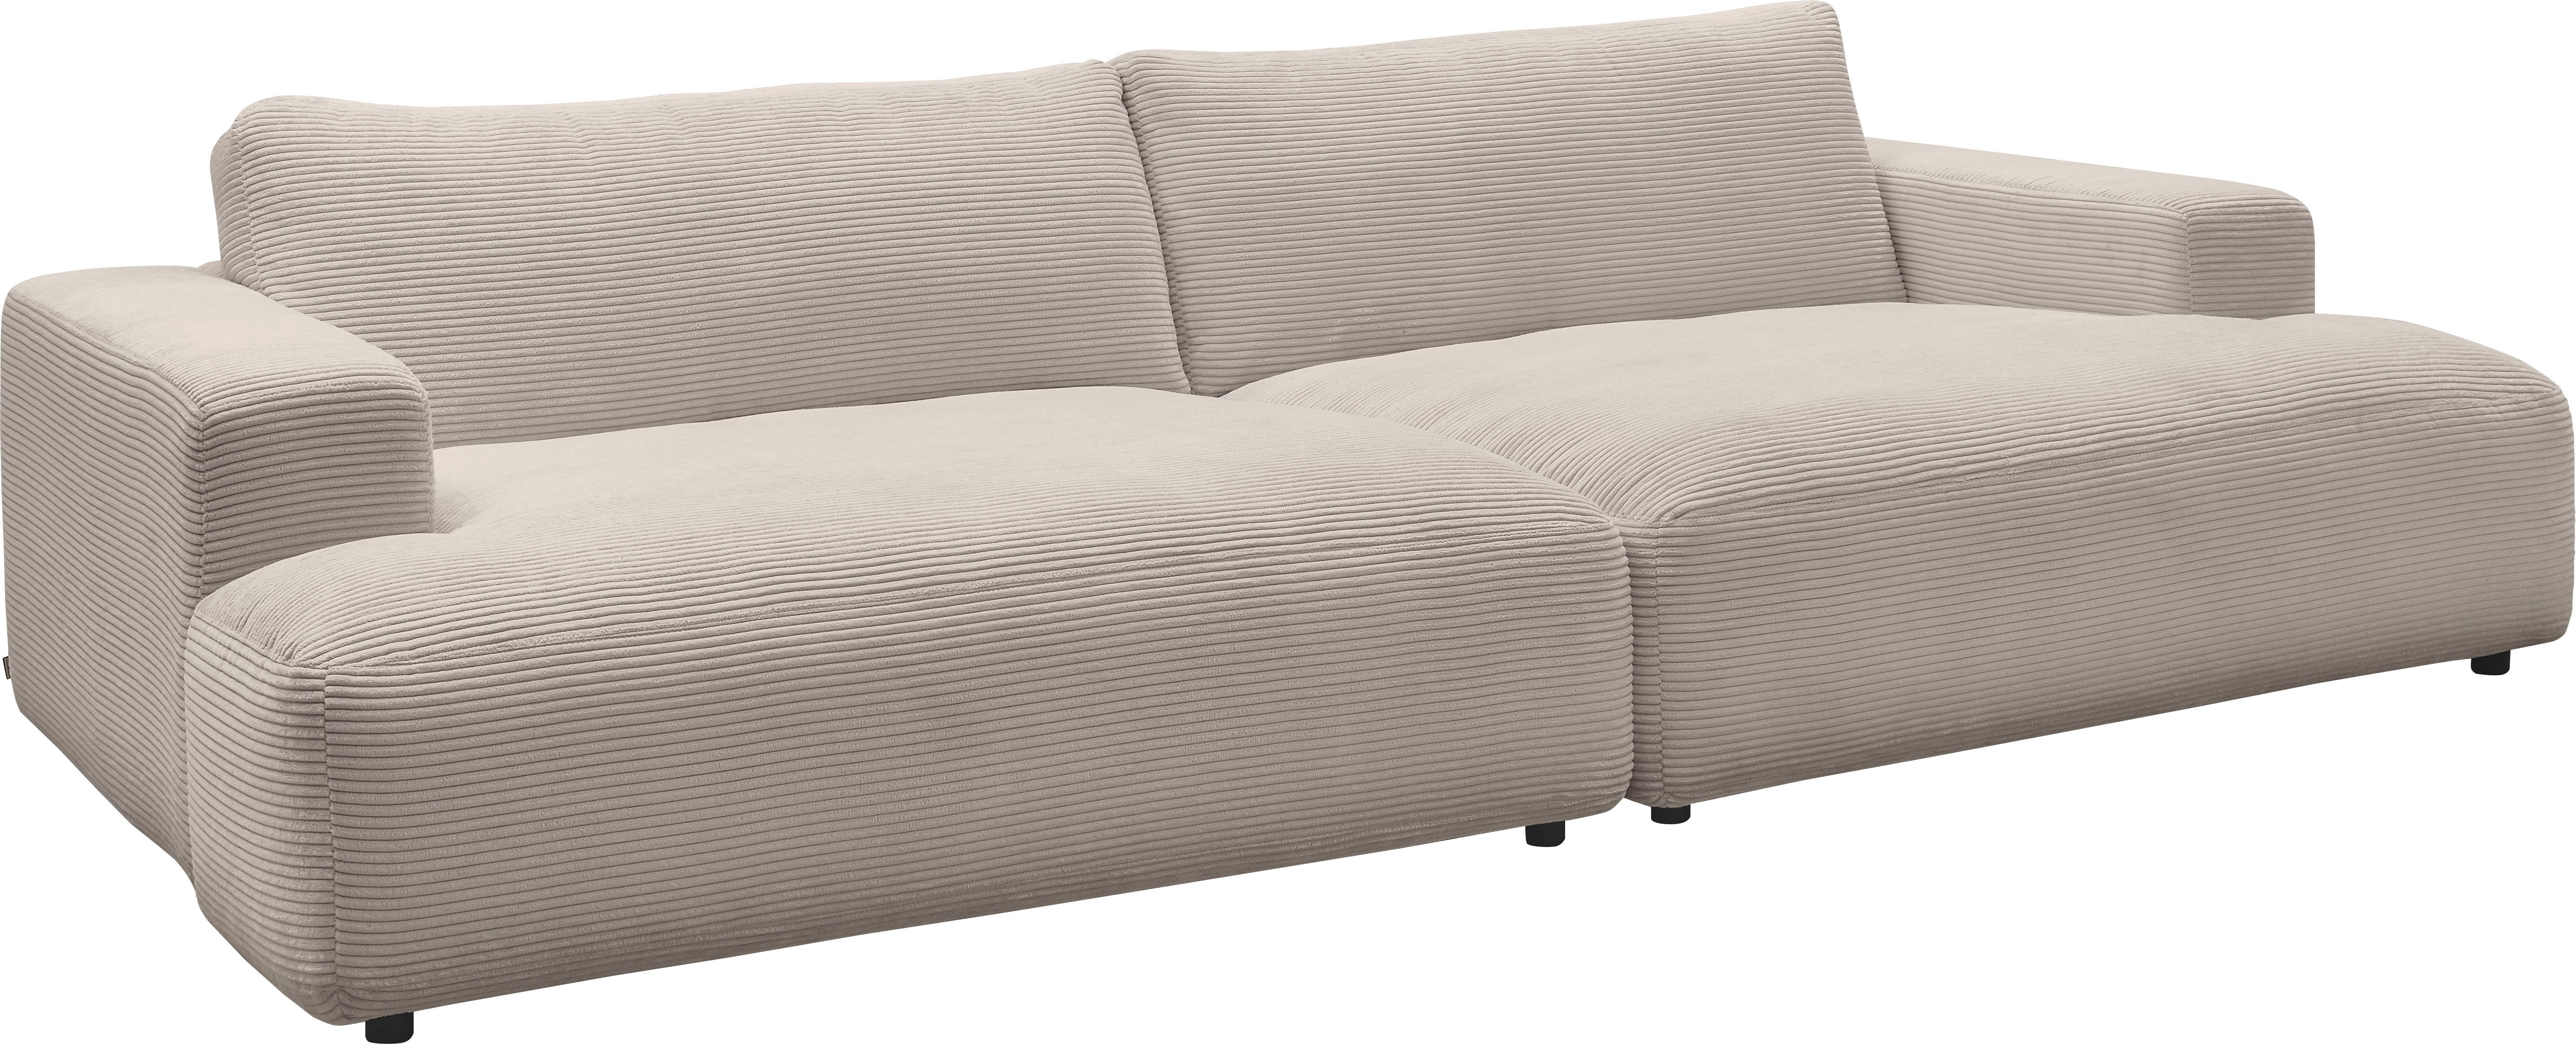 GALLERY M branded Lucia, by Cord-Bezug, cm Breite light-grey Musterring Loungesofa 292